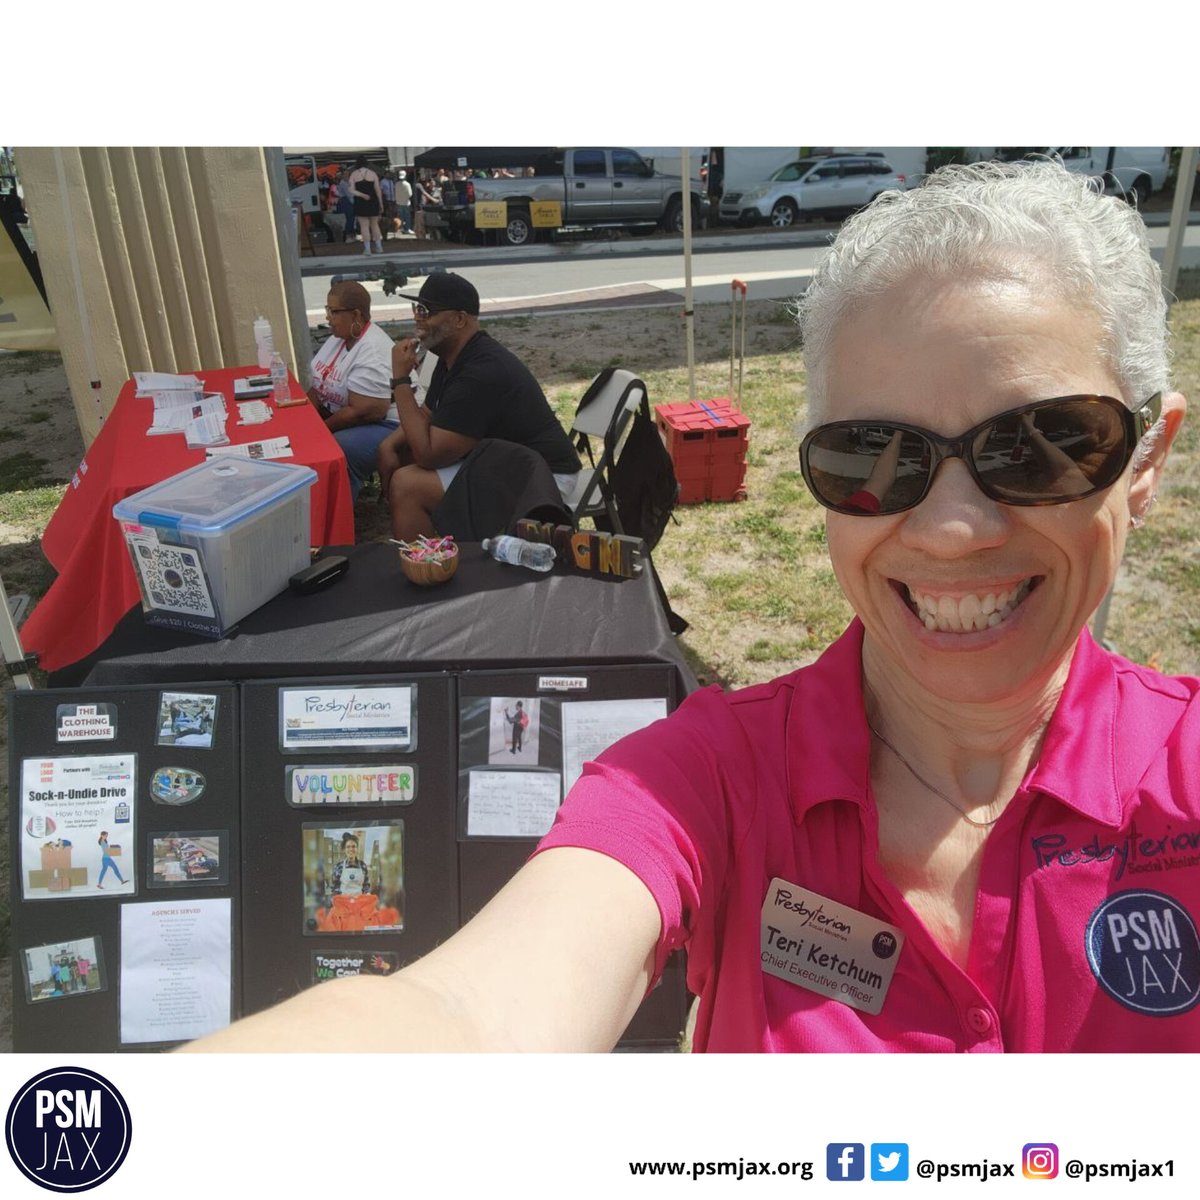 We are at the Riverside Arts Market, so stop by the PSMJax booth and say hello to our CEO, Teri Ketchum. We look forward to seeing you 🤩

#PSMJax #RiversideArtsMarket #Booth #VolunteersWeek #Nonprofit #SayHello